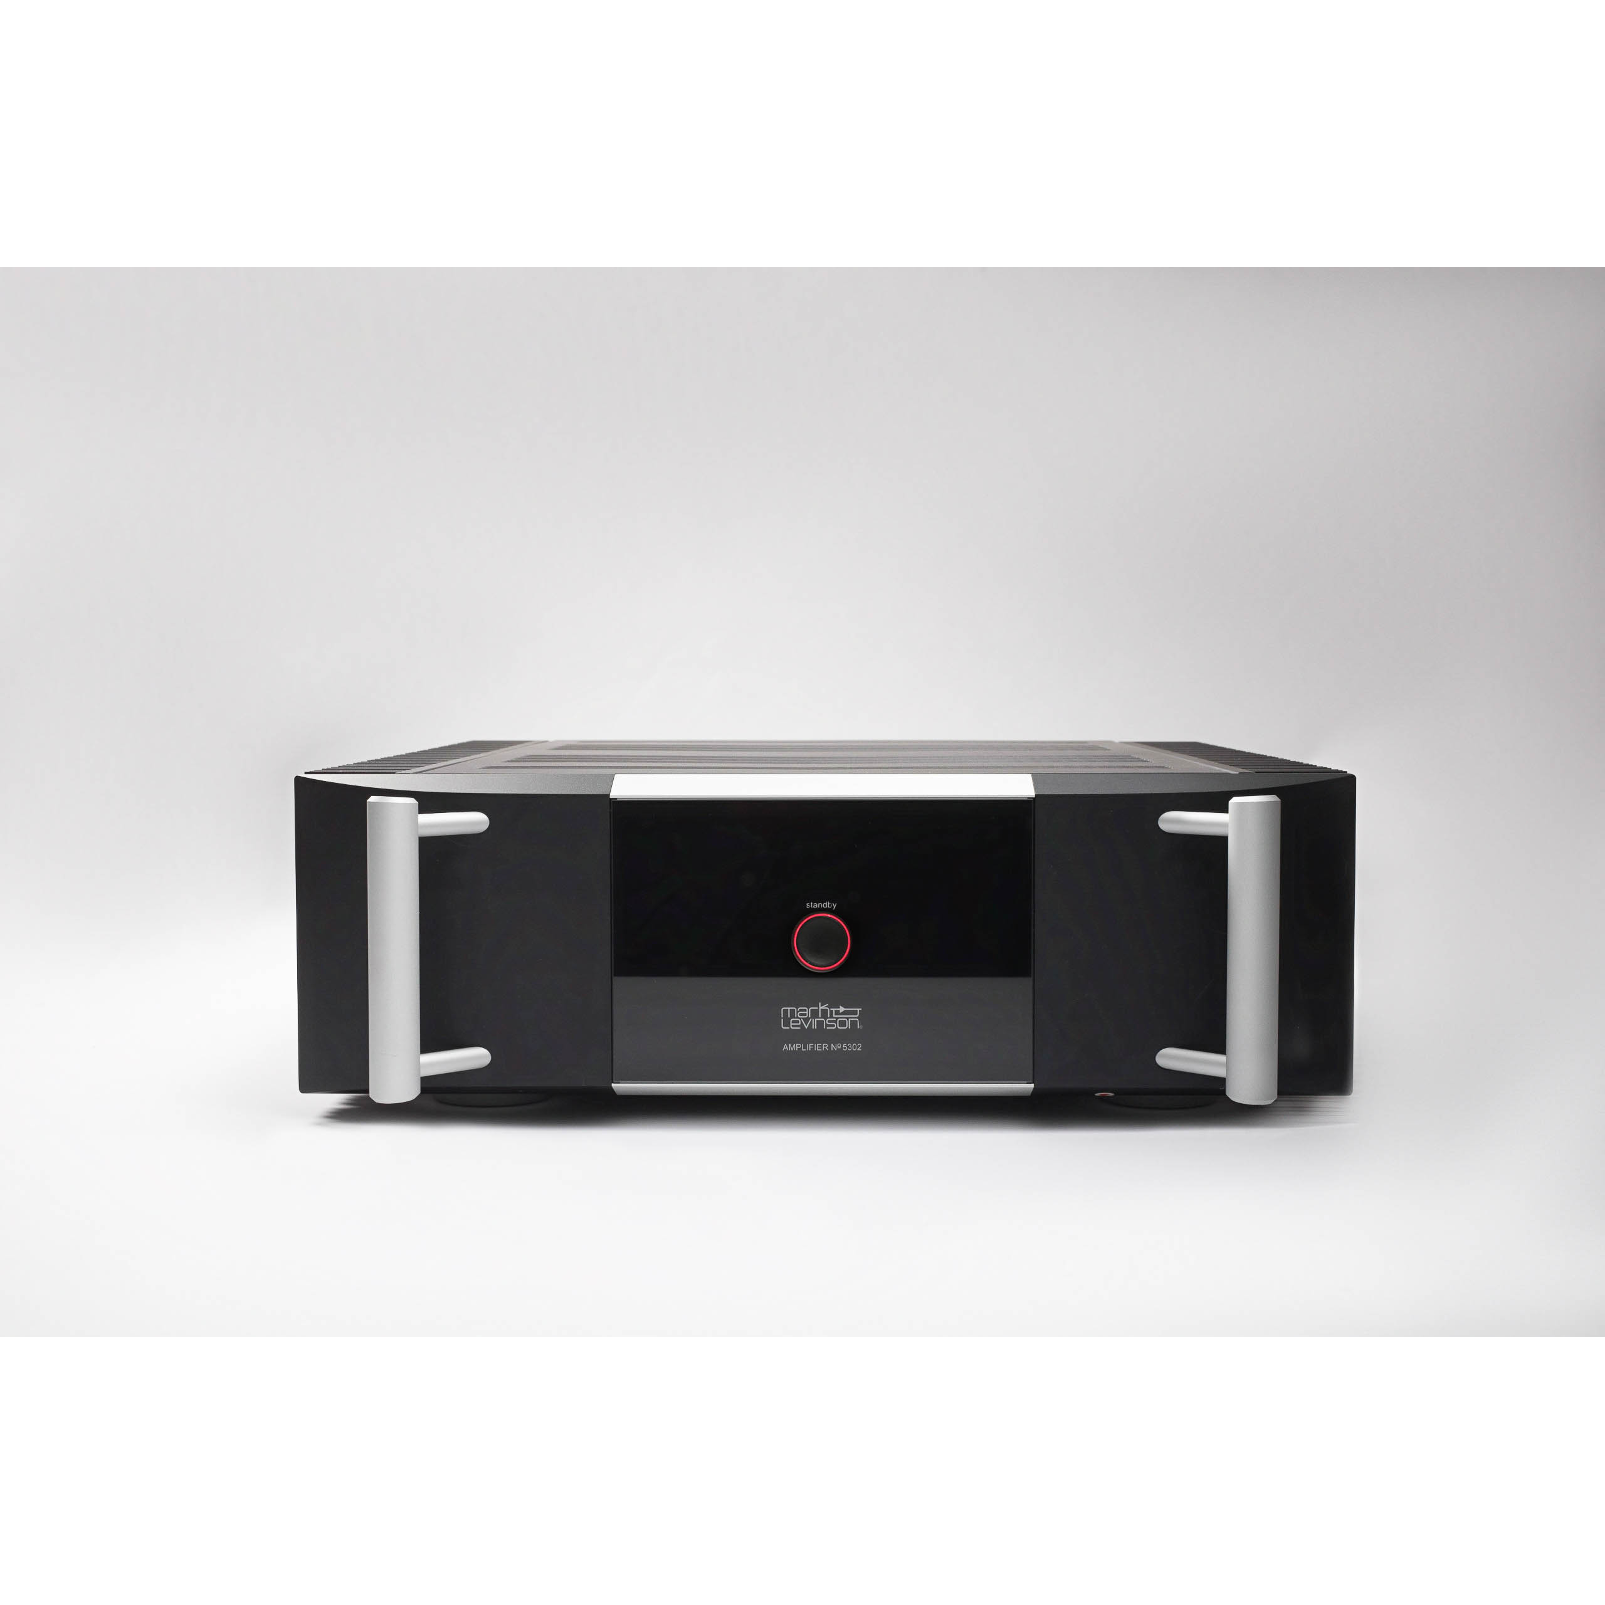 №5302 - Black - Fully-discrete, direct-coupled, dual-monaural, Class AB amplifier - Front